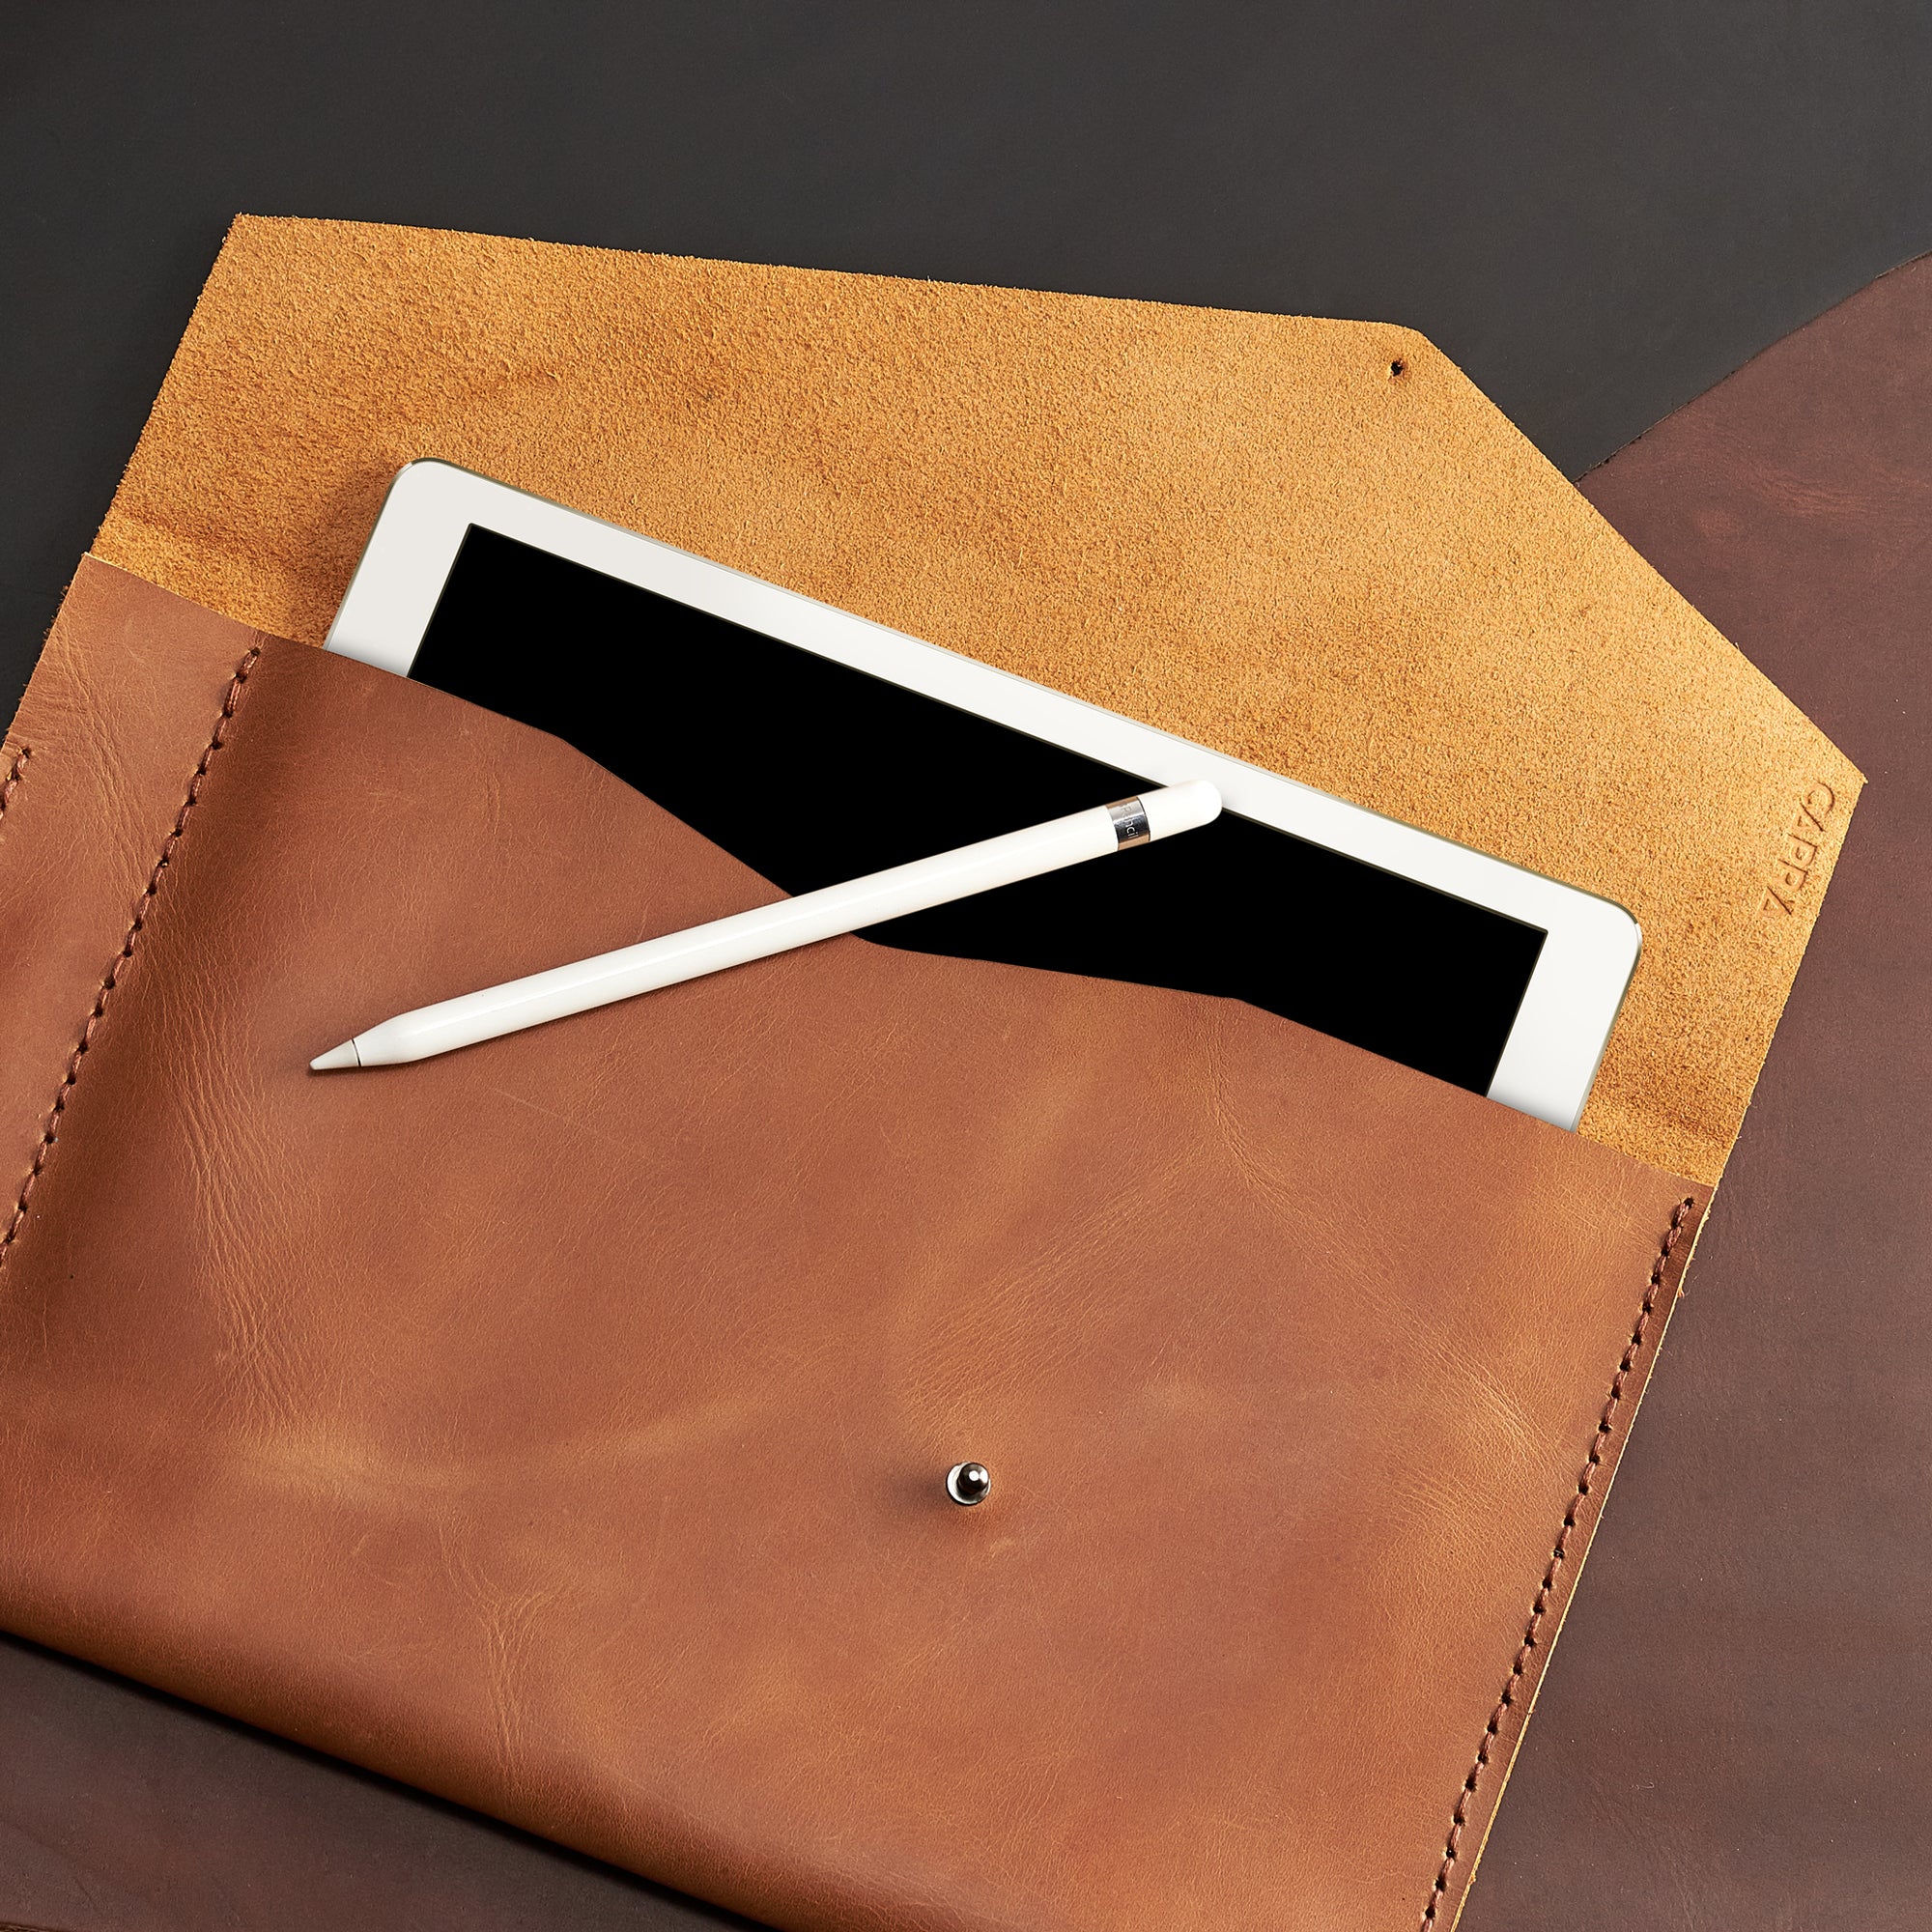 Soft anti scratch interior. Light brown leather sleeve for Pixel Slate. Case for Pixel Slate. Mens gifts